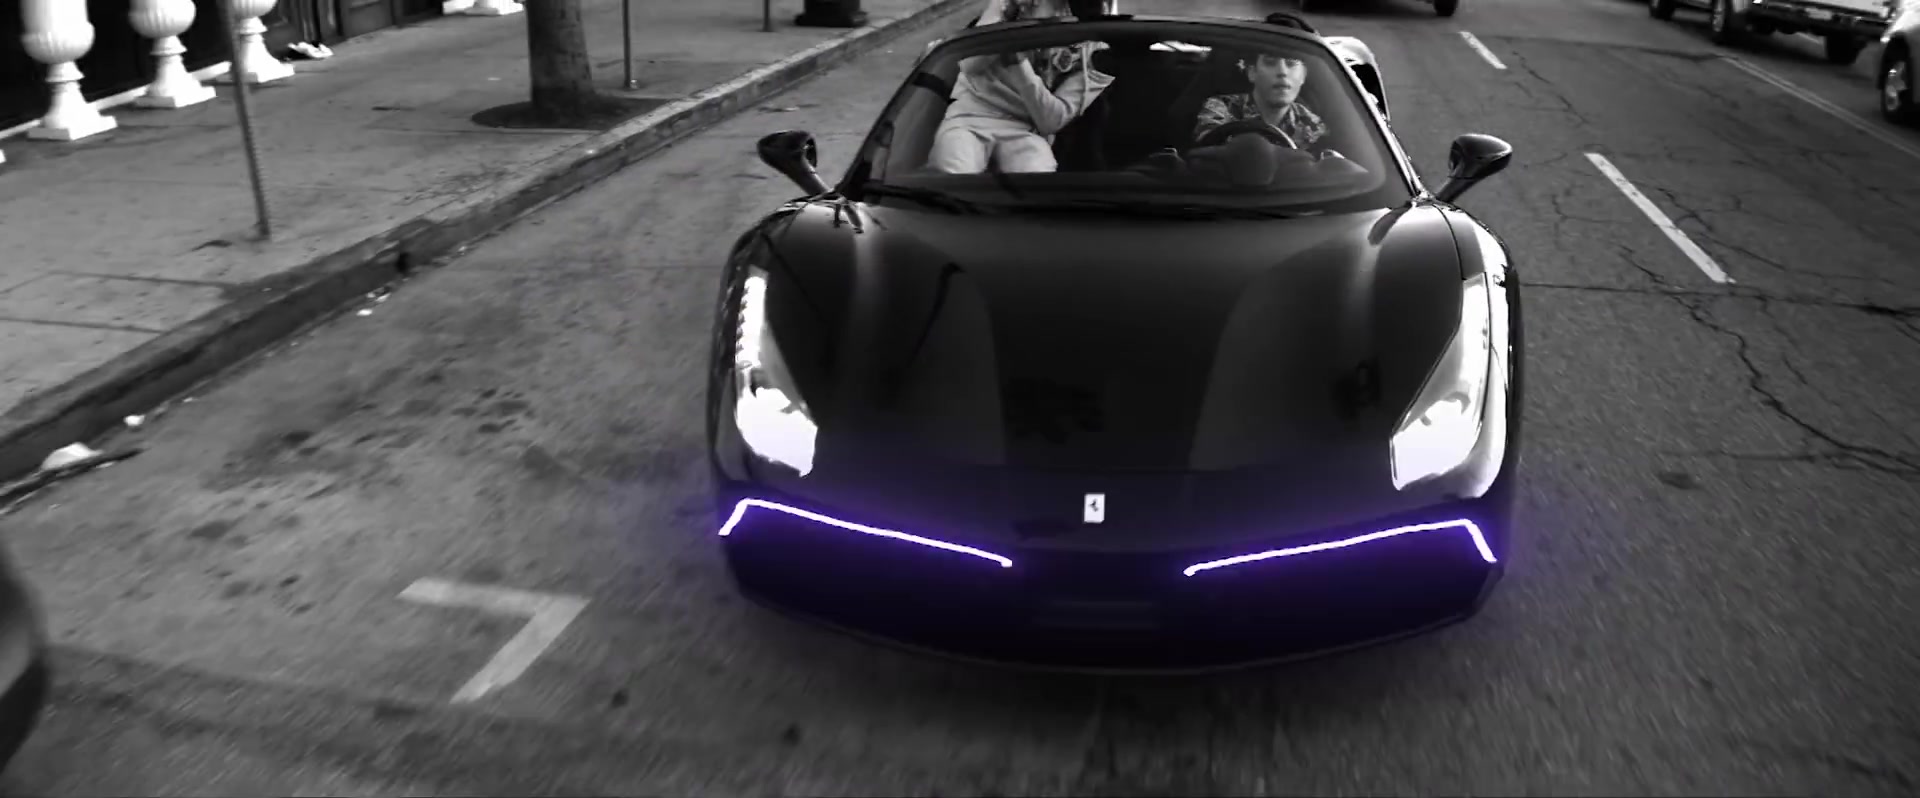 Ferrari Convertible Sports Car Driven by G-Eazy in West Coast (2019) Official Music Video1920 x 798